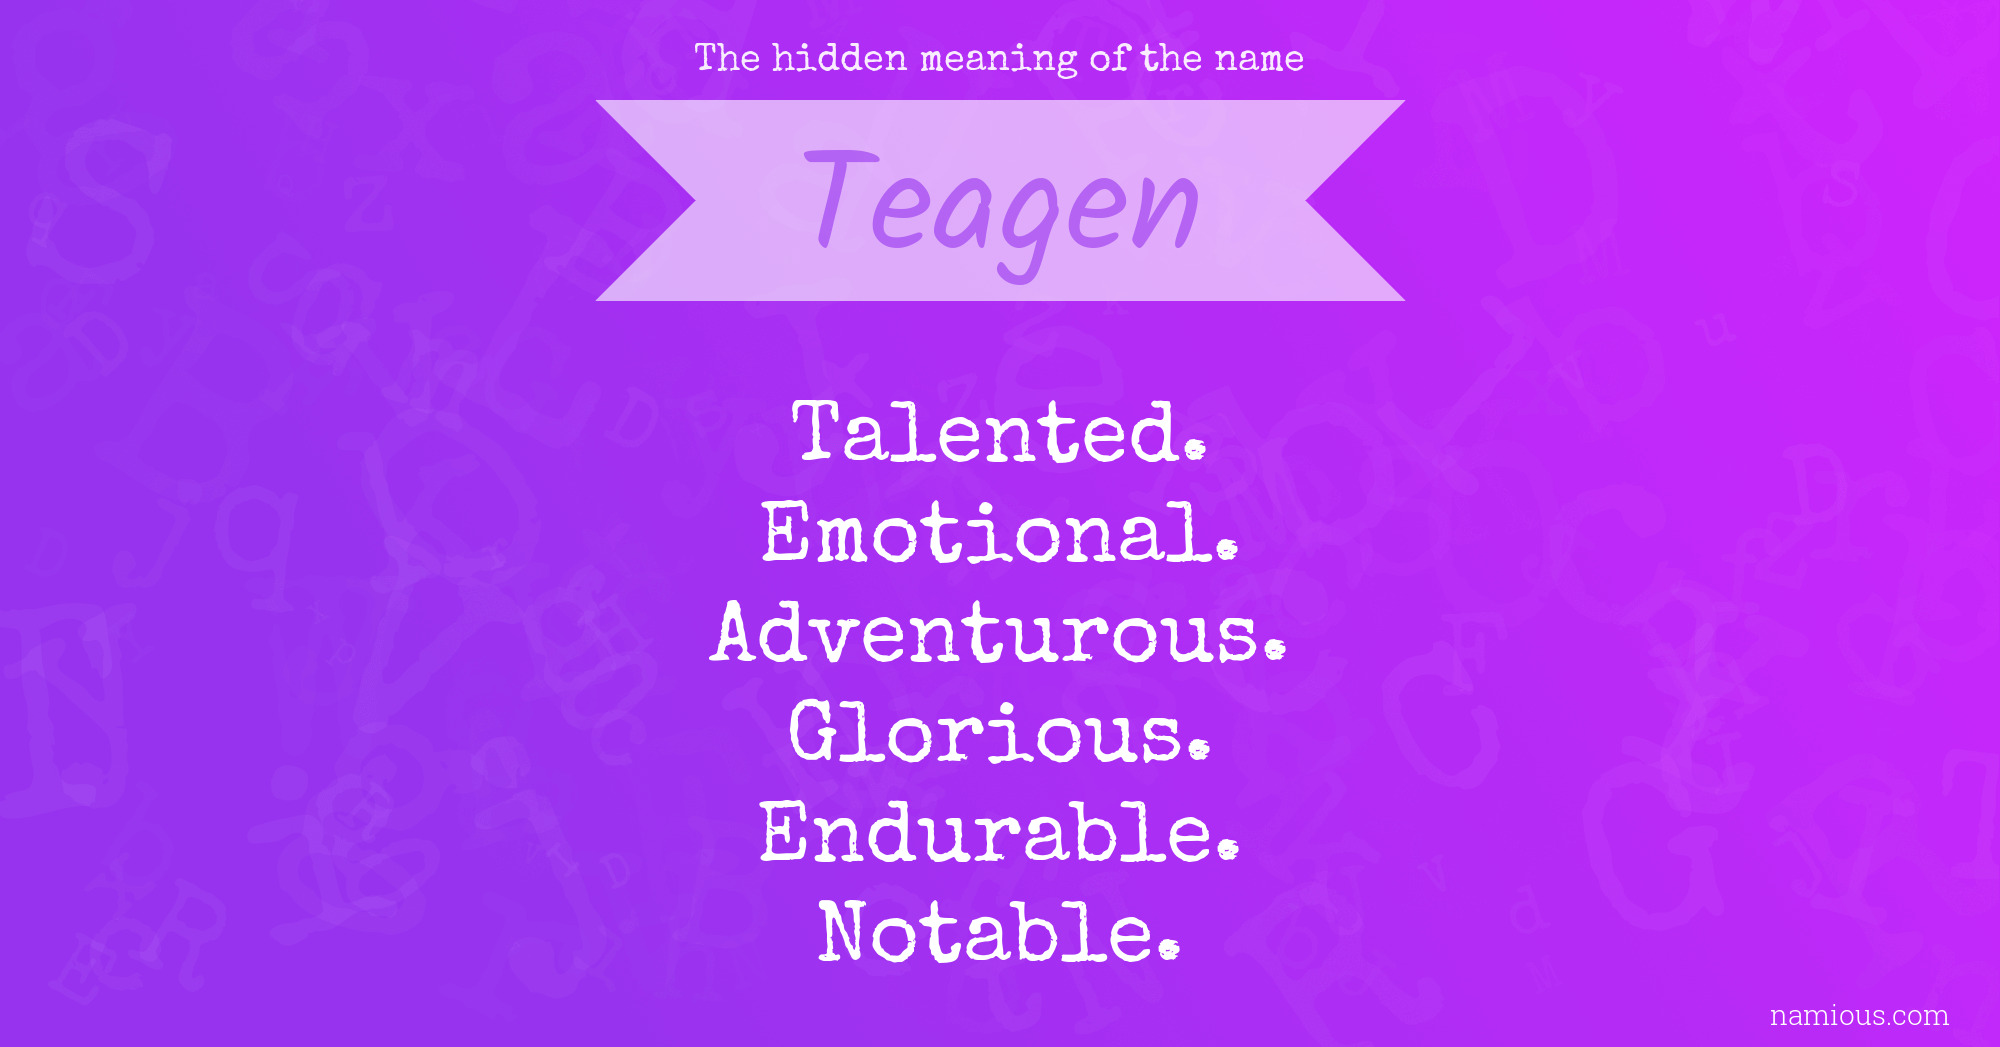 The hidden meaning of the name Teagen